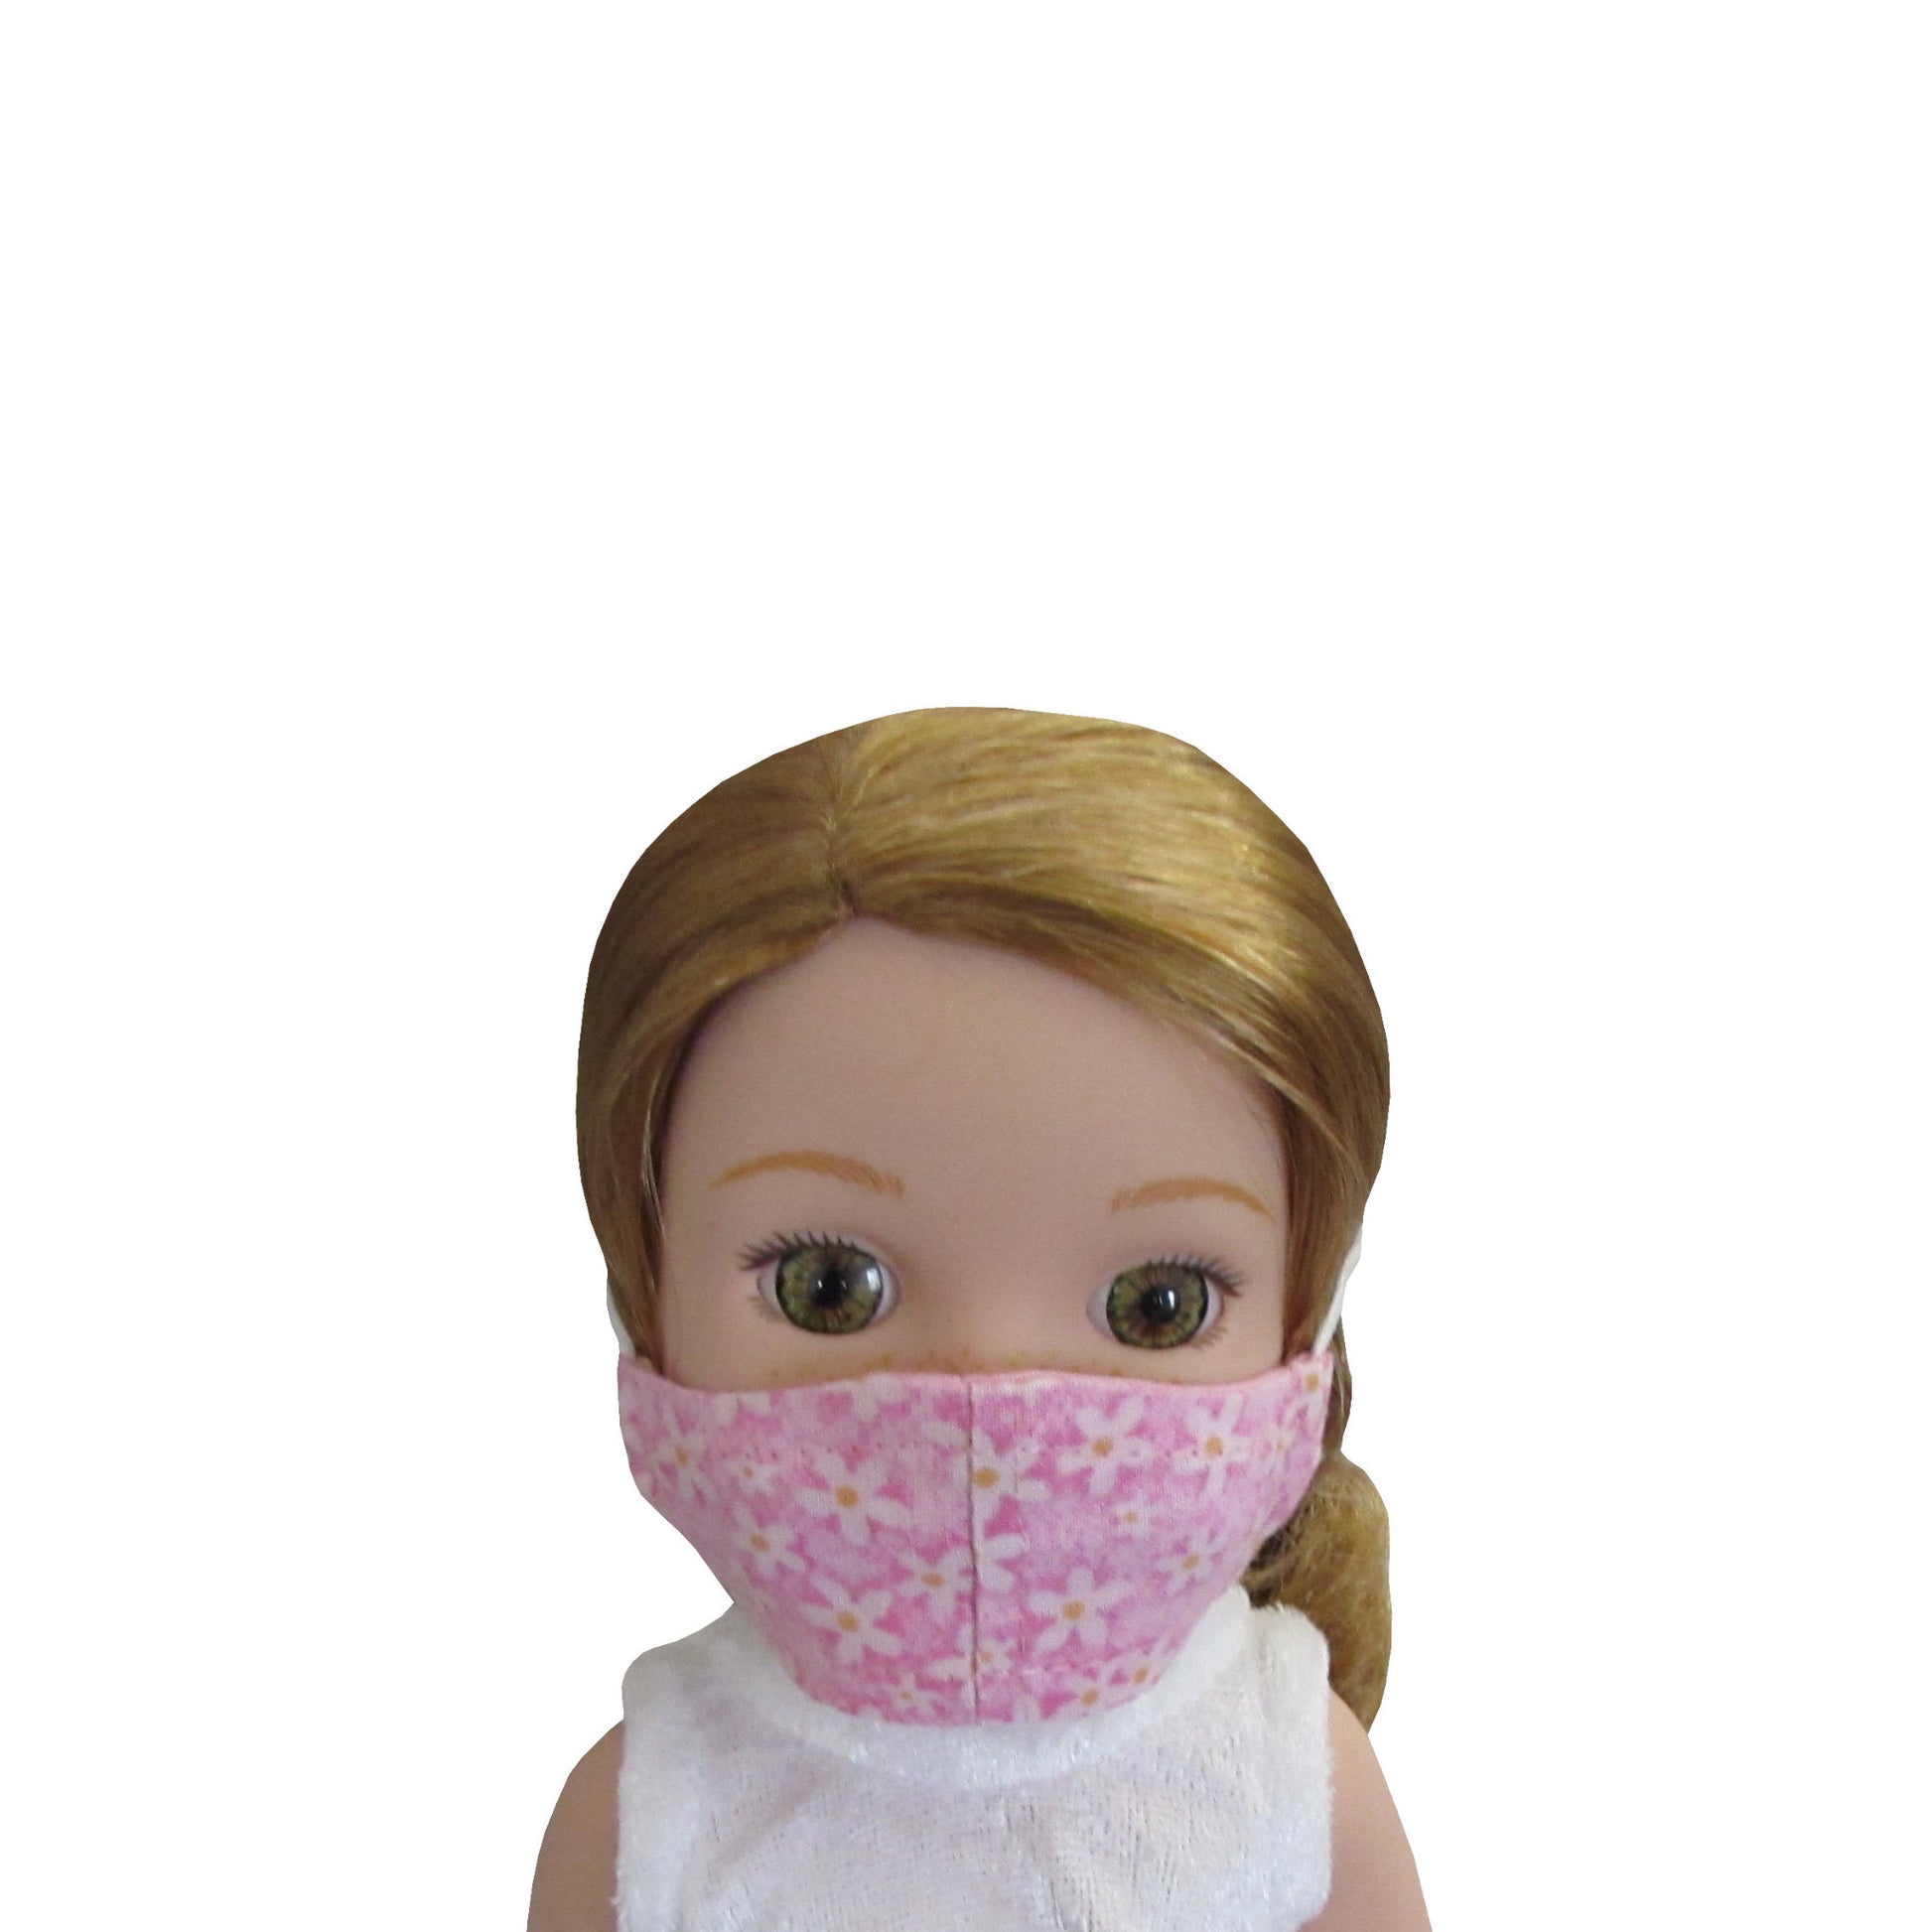 White Flowers on Pink Floral Print Doll Face Mask for 14 1/2-inch dolls with Wellie Wishers doll Front